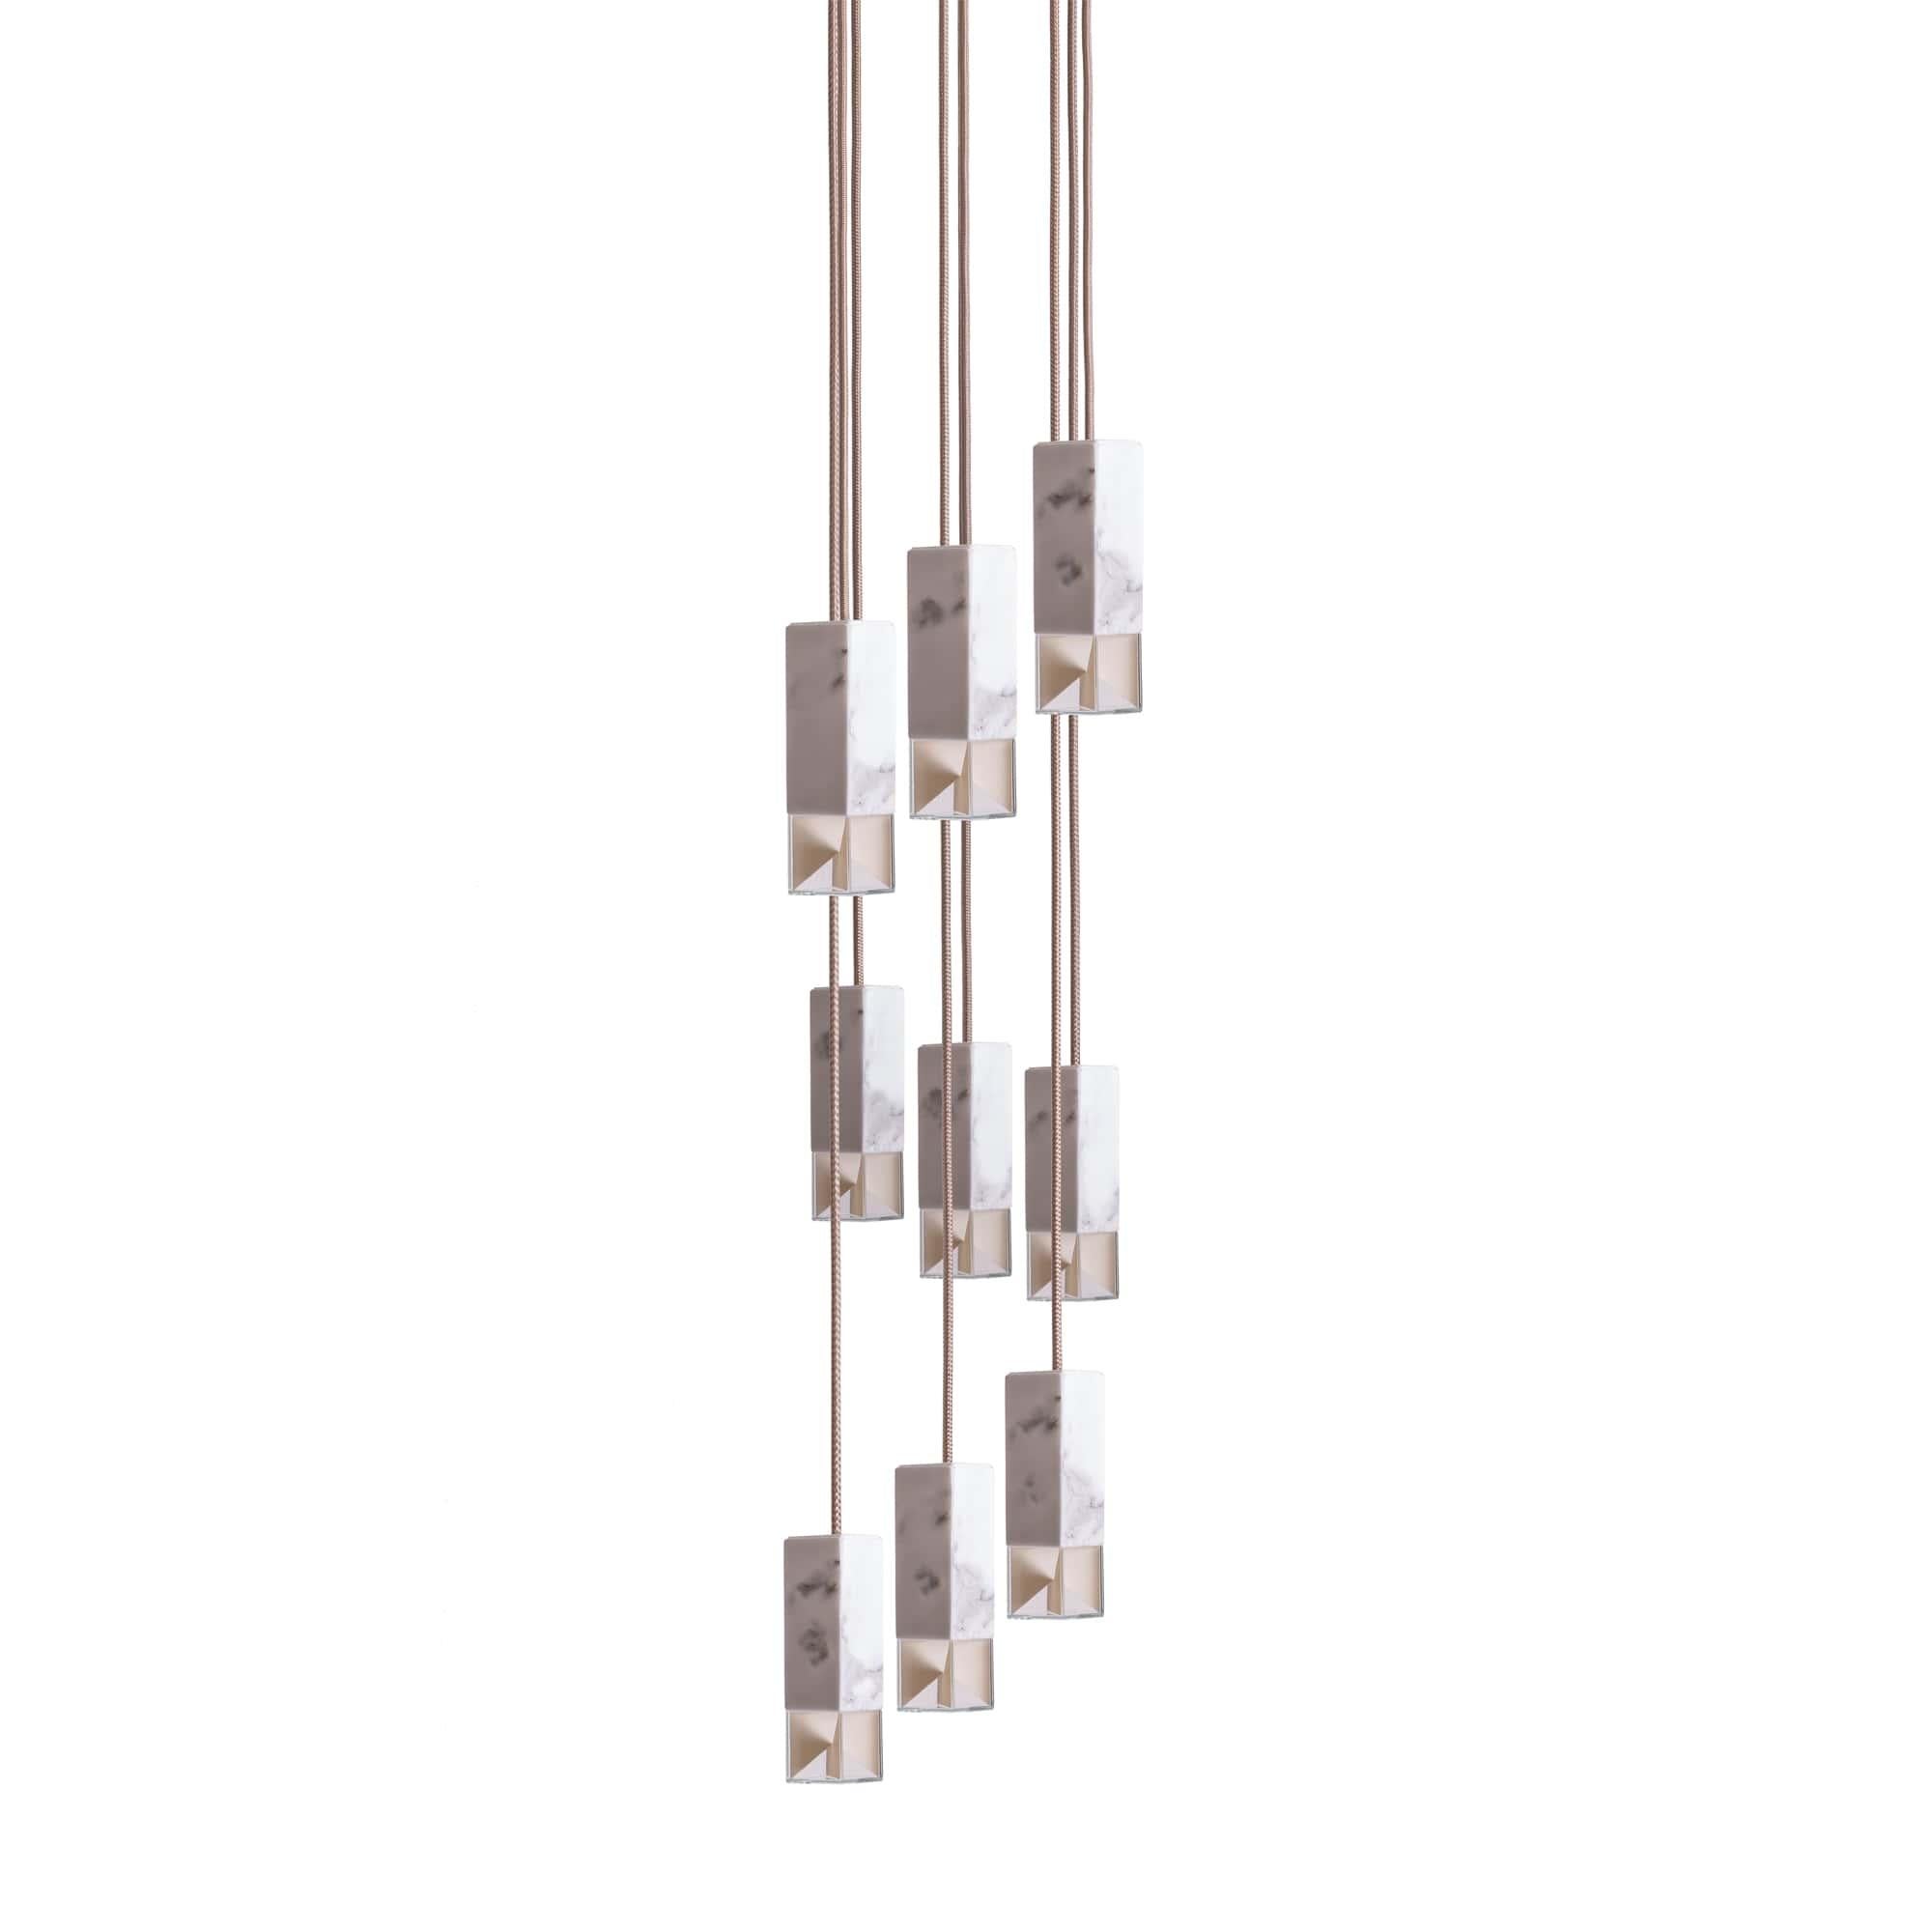 Lamp one 9-light chandelier in marble by Formaminima
Dimensions: H 111.9 x 30 x 30 cm
Materials: Lamp body in solid brass, satin finish

Ultra-thin anti-reflection crystal diffuser
Inside-diffuser Limoges biscuit-finish porcelain sheets
Satin